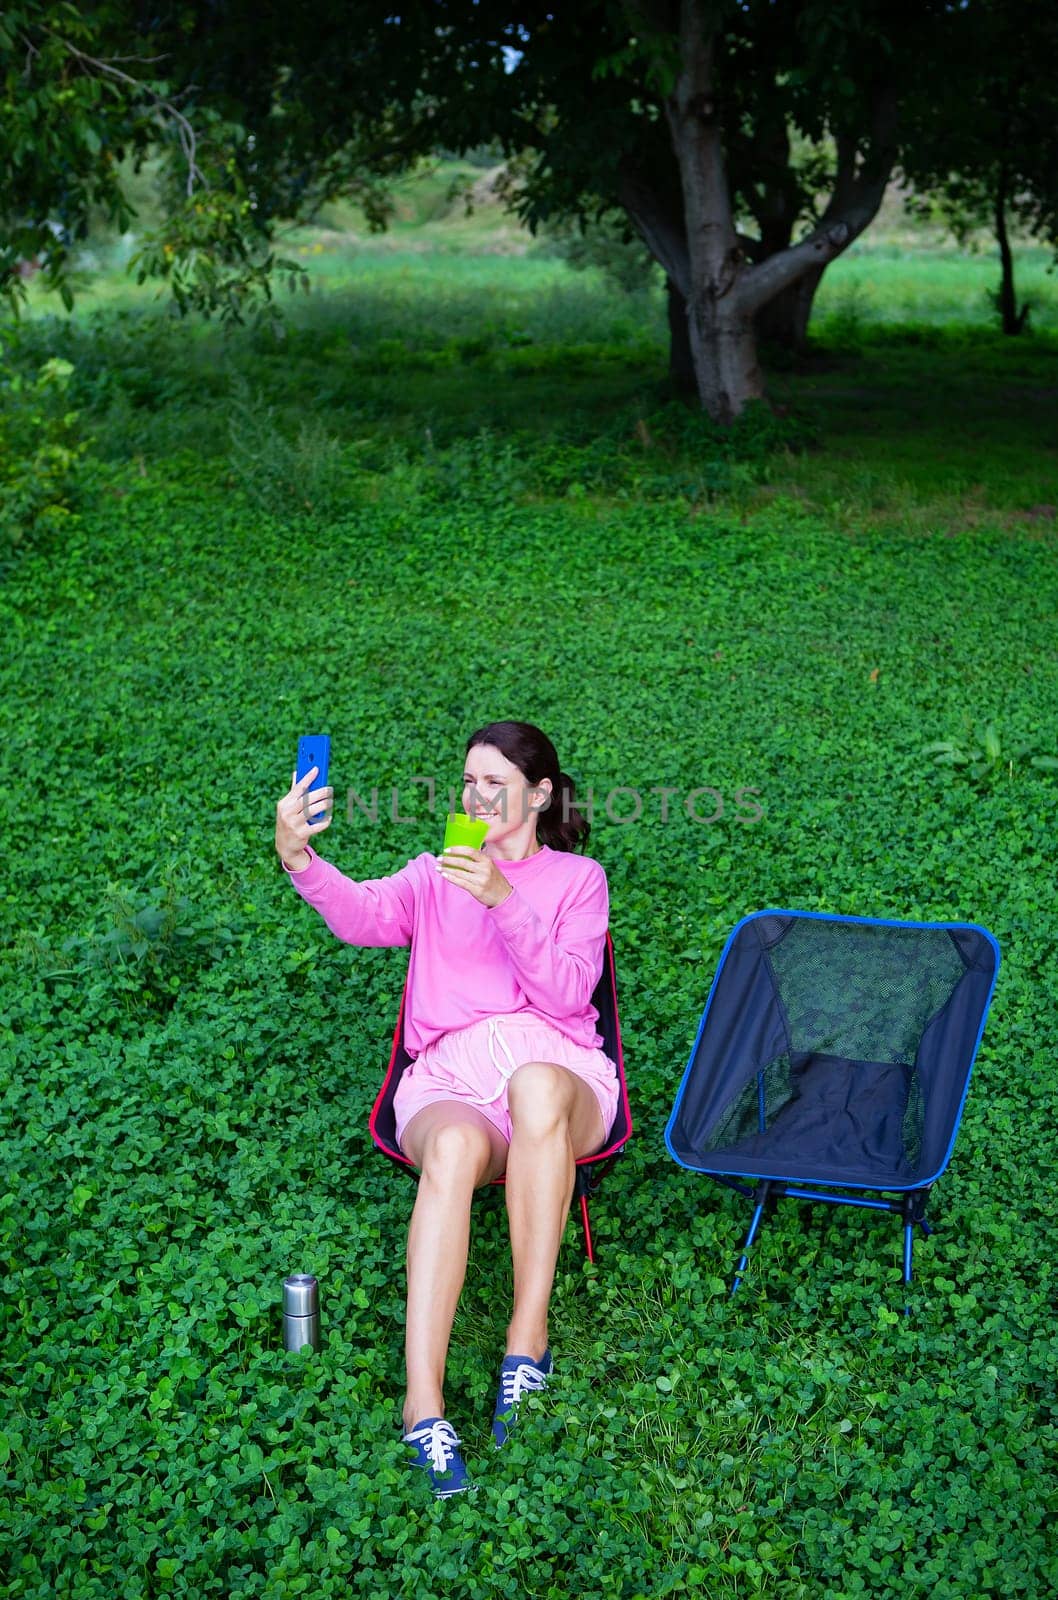 A girl in pink takes a selfie outdoors while sitting on a blue chair among lush greenery